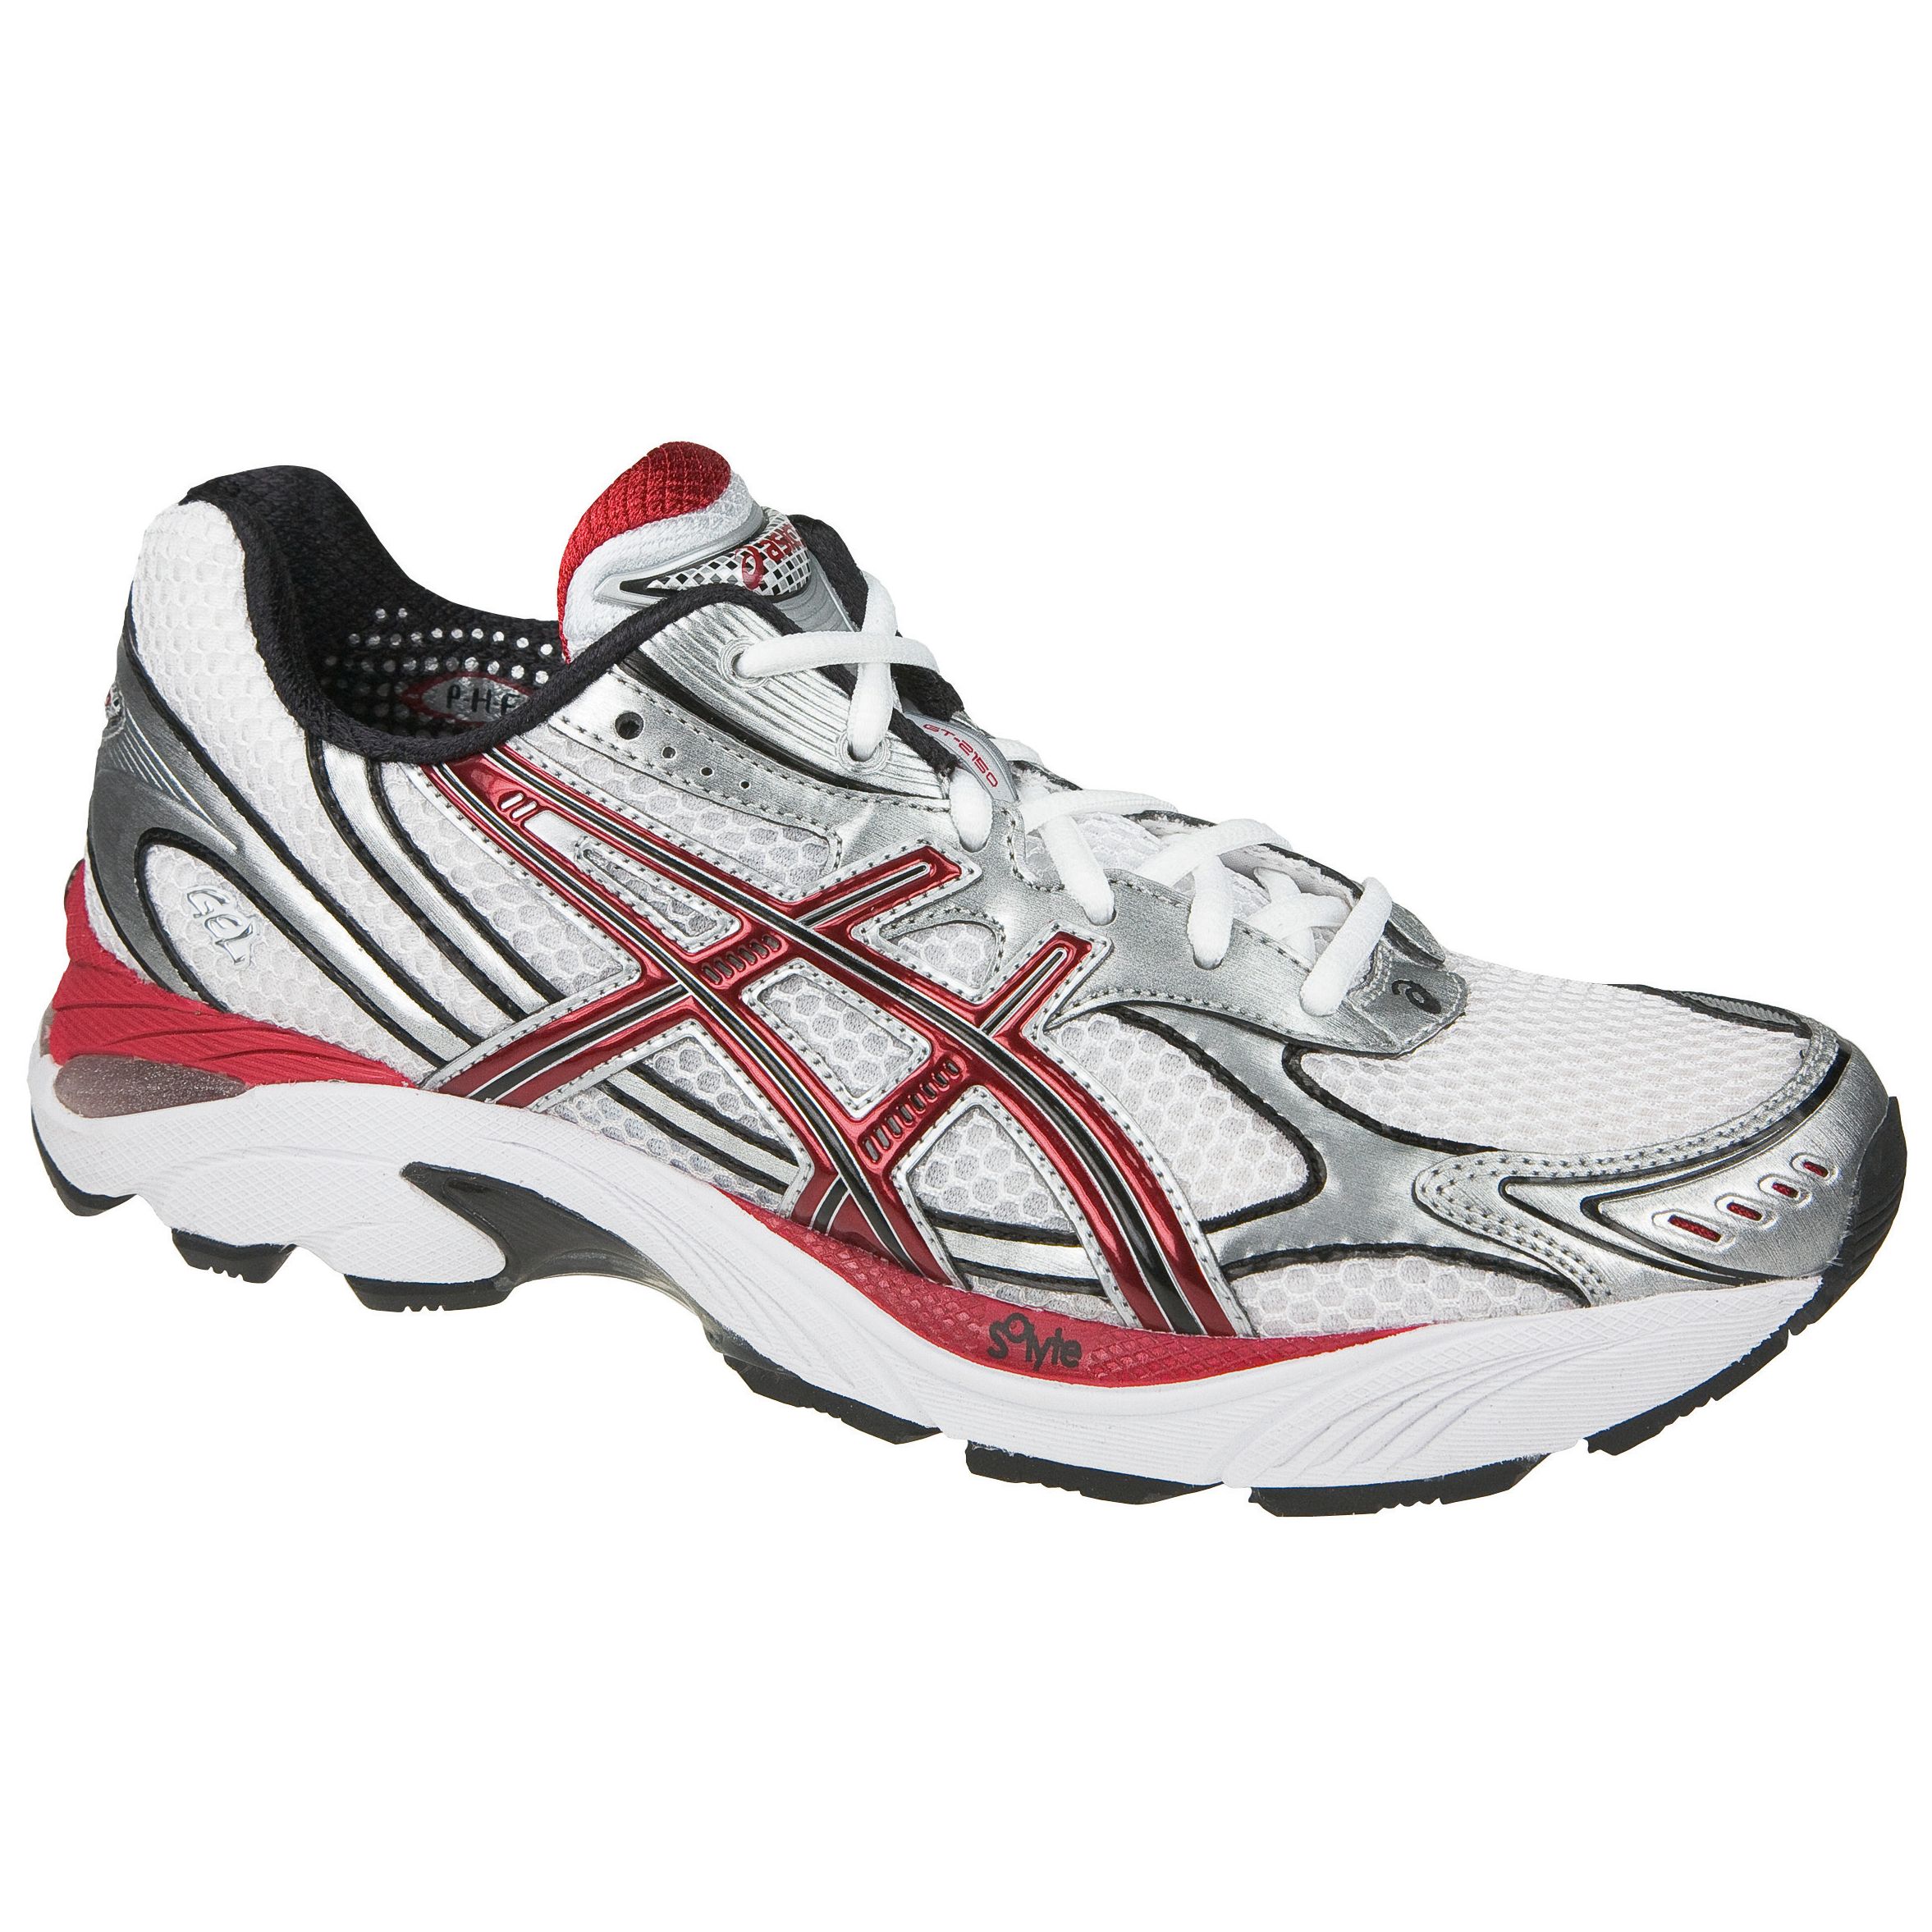 Asics GT2150 Running Shoes, White/red, 8